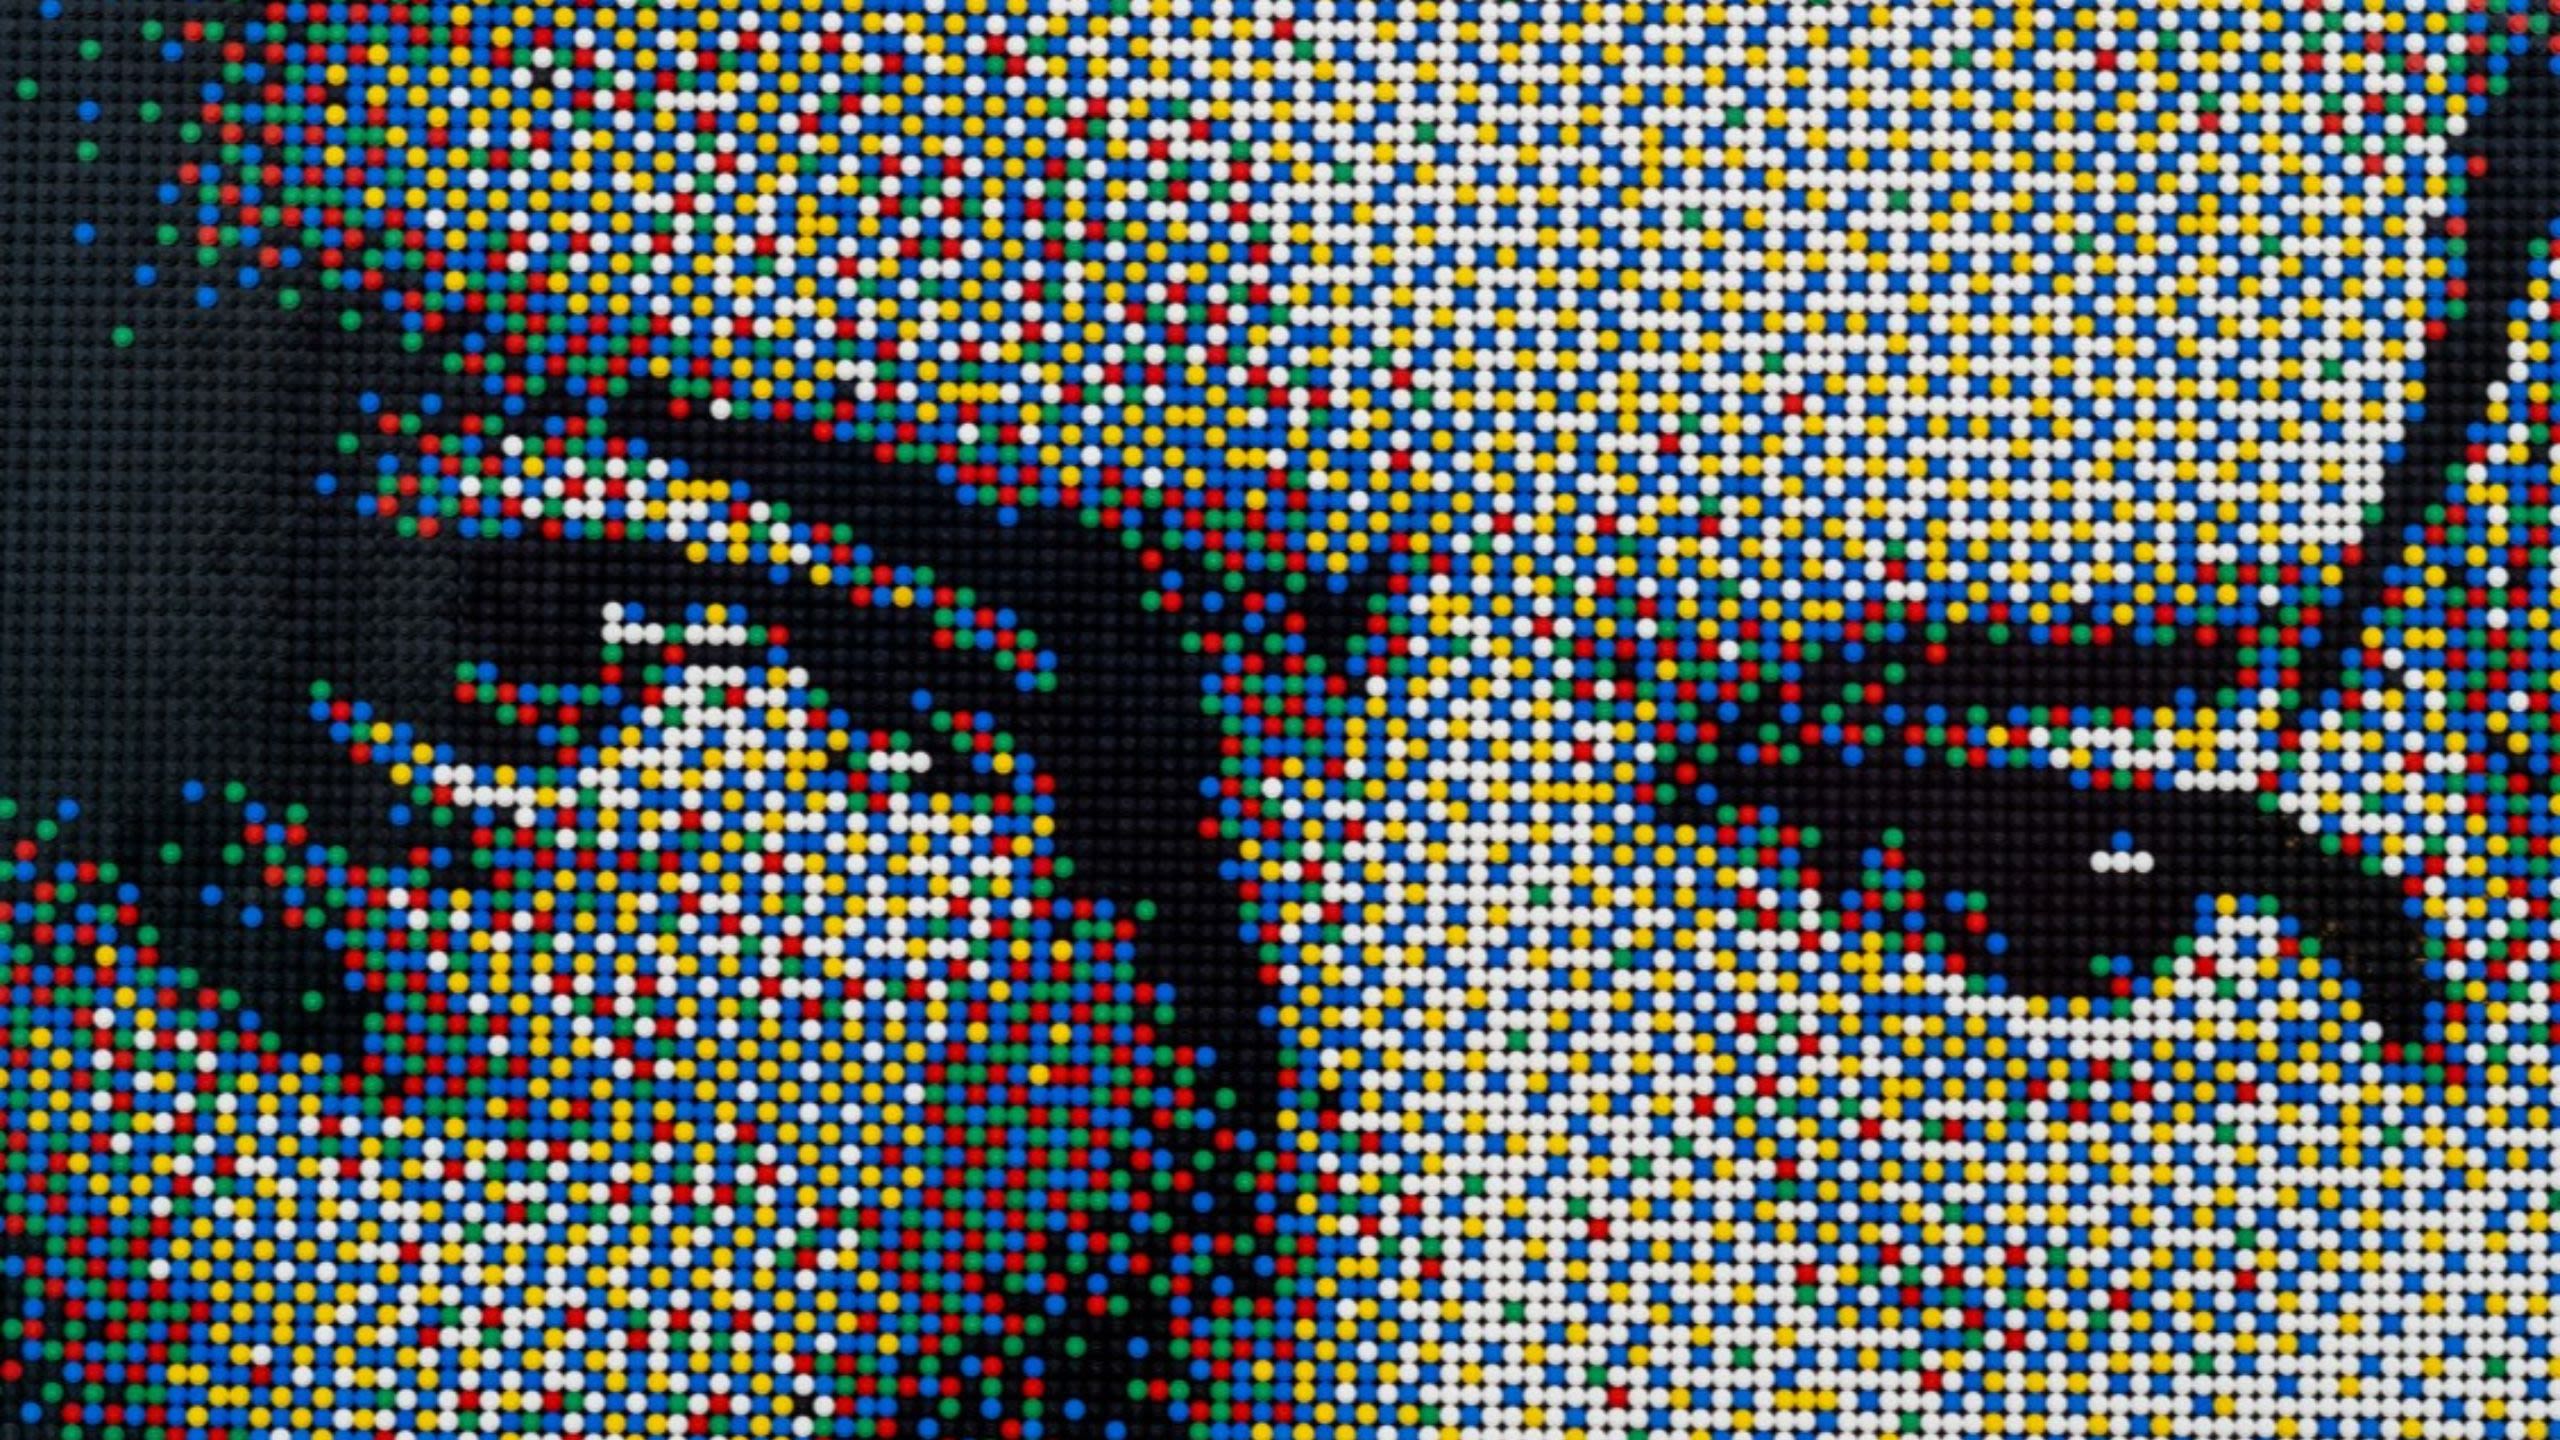 Close-up of David Bowie's eyes are recognizable in Jonason's Lego mosaic. 